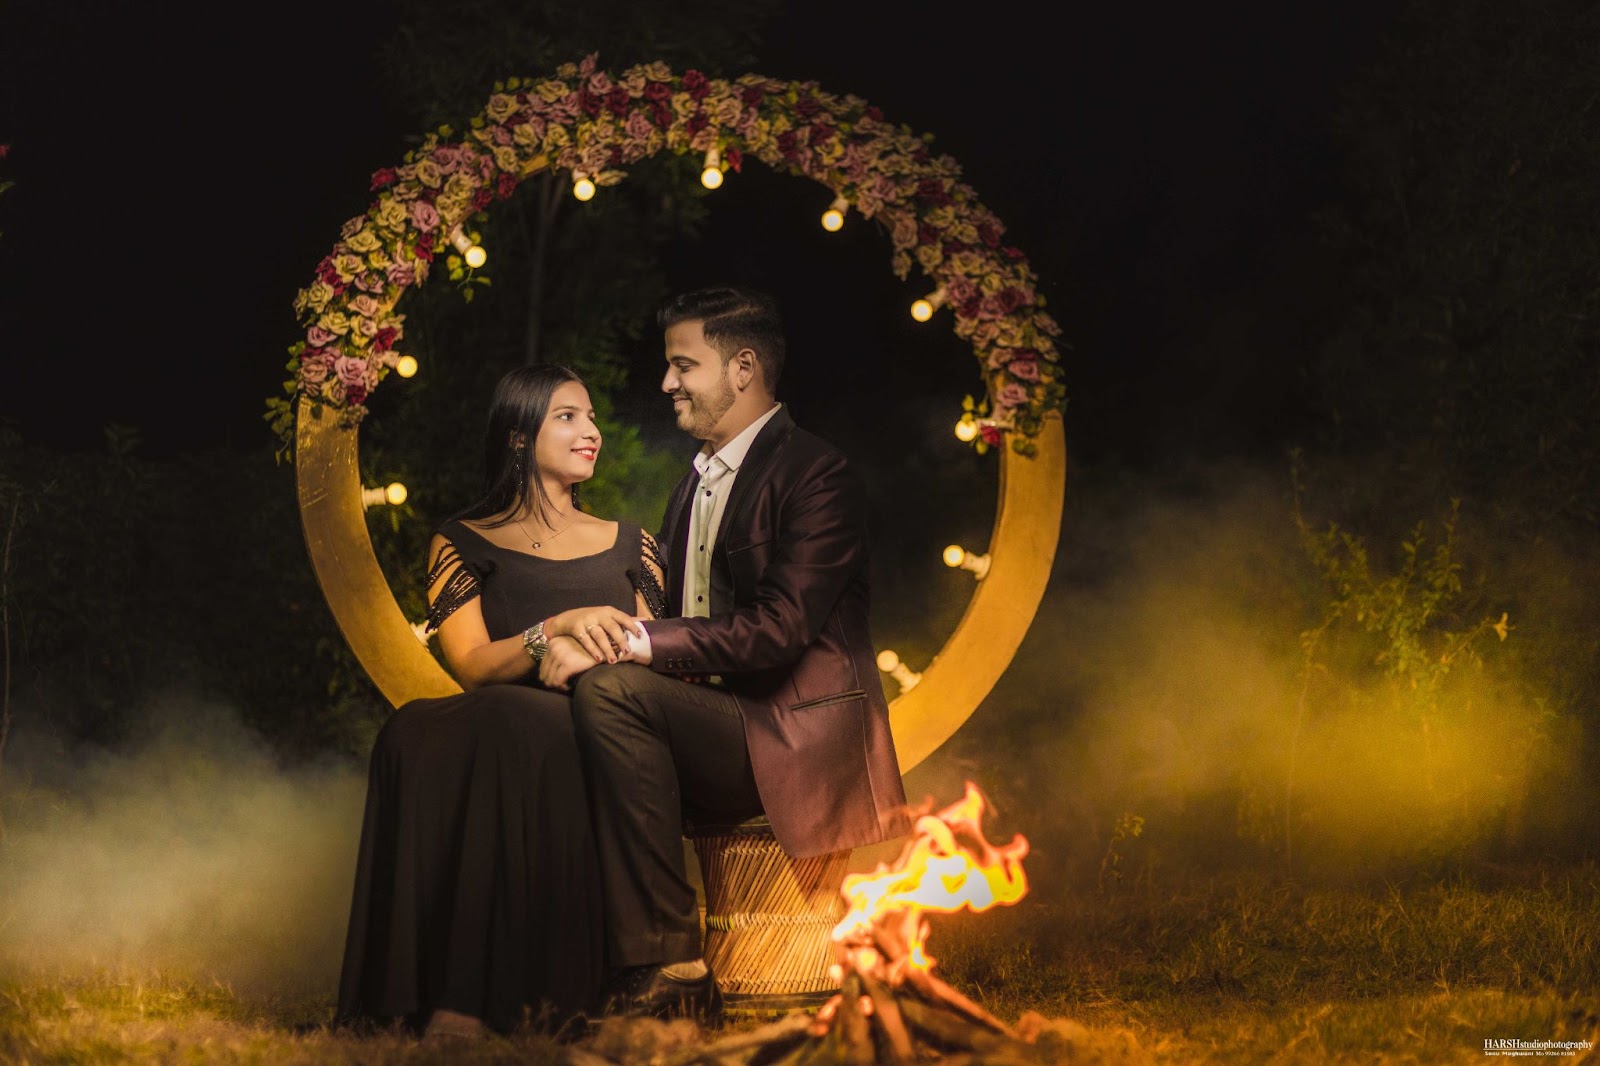 Romantic pre-wedding shoot with couple sitting by a campfire, captured by Harsh Studio Photography in 2024. Location: Indore, Madhya Pradesh, India.